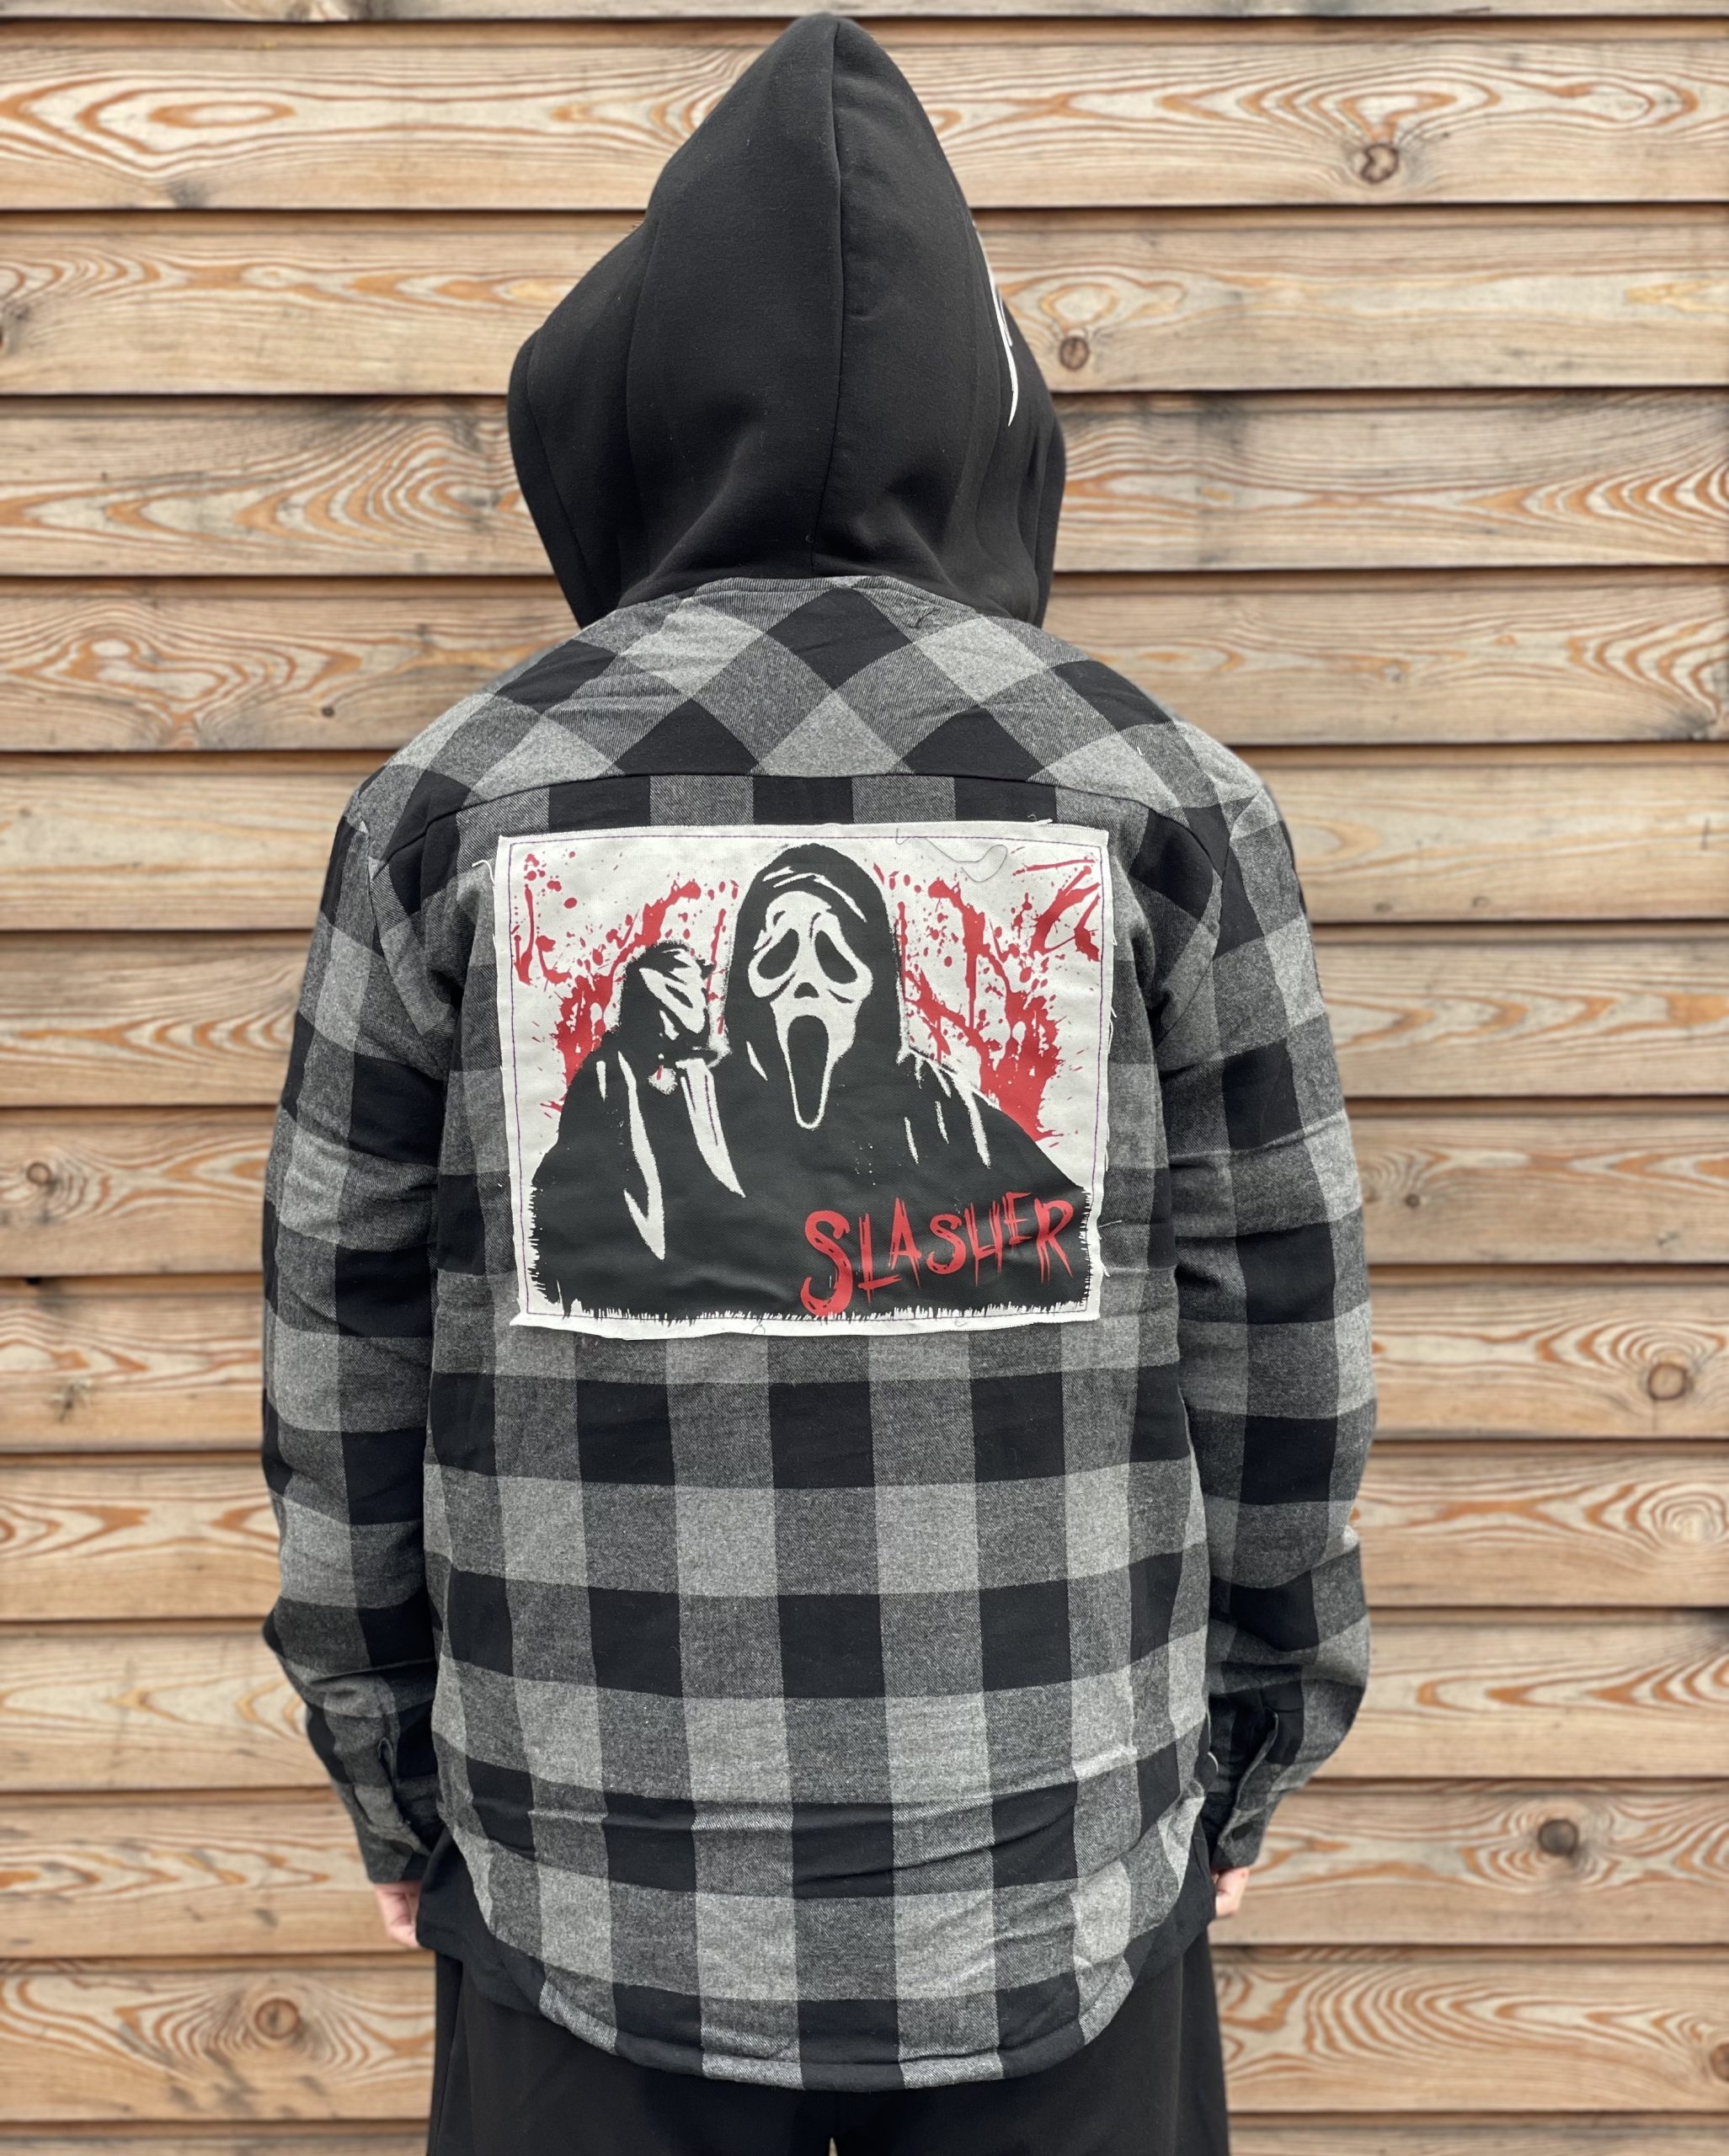 Ghost Face Hooded Flannel